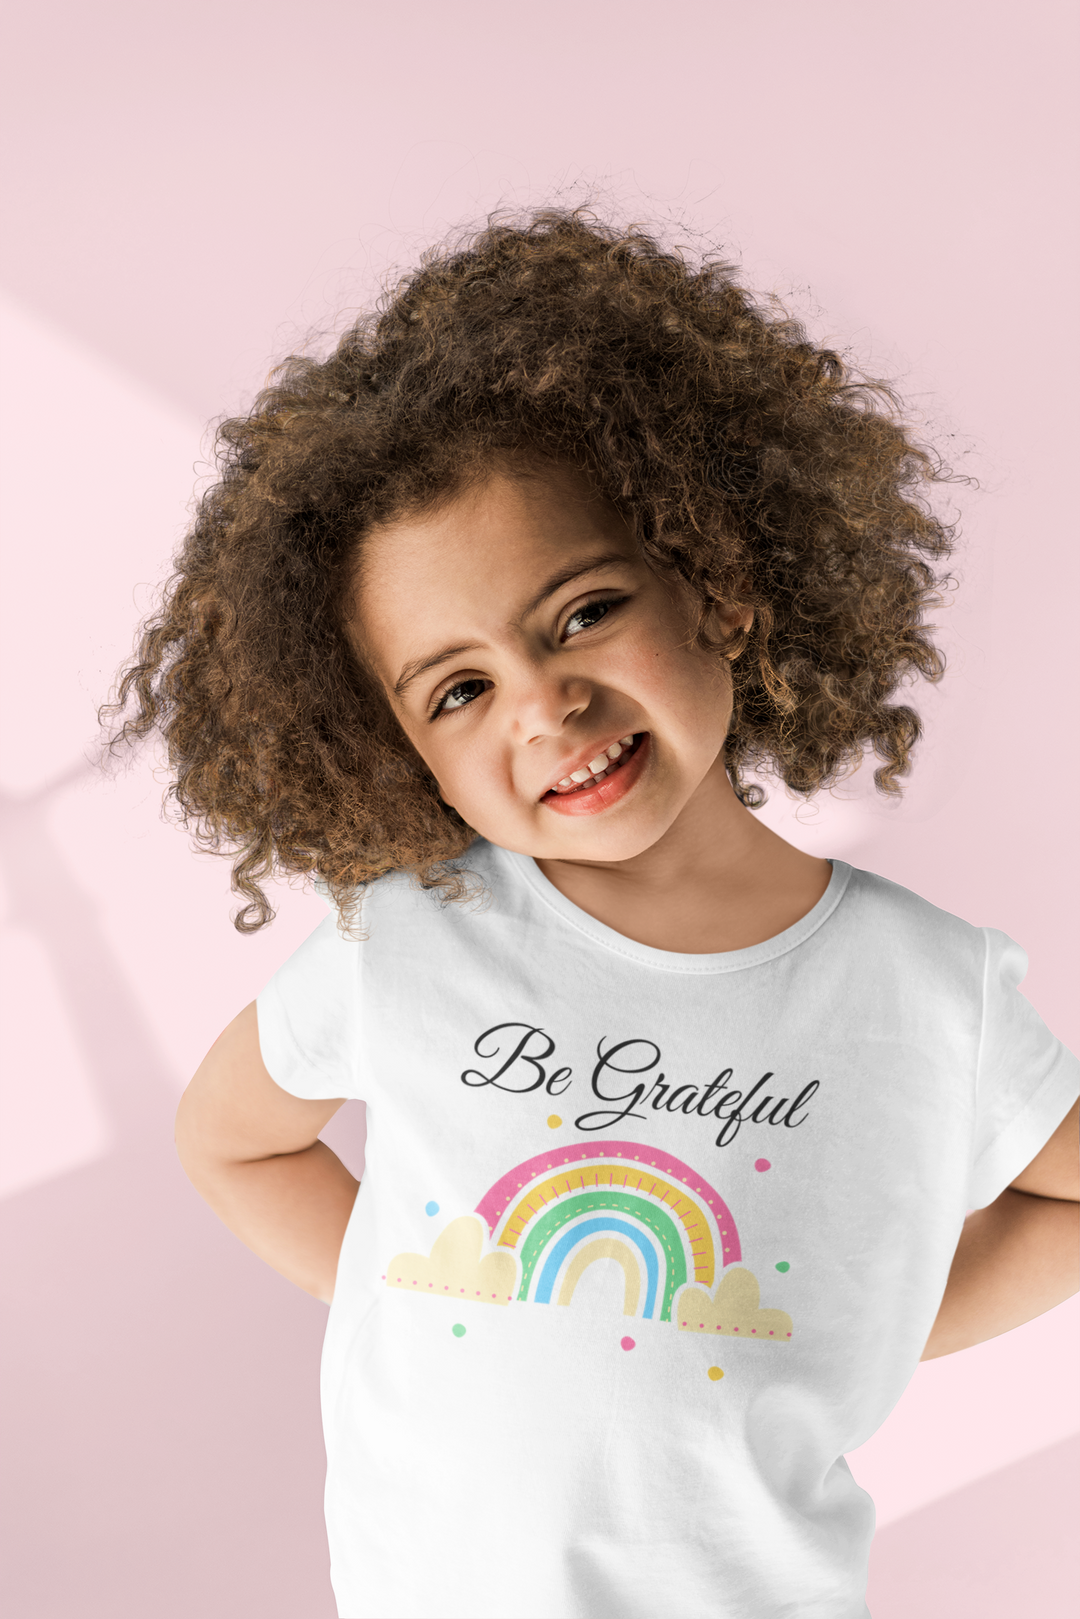 Be Grateful. Gospel song graphic t shirt for toddlers and kids.